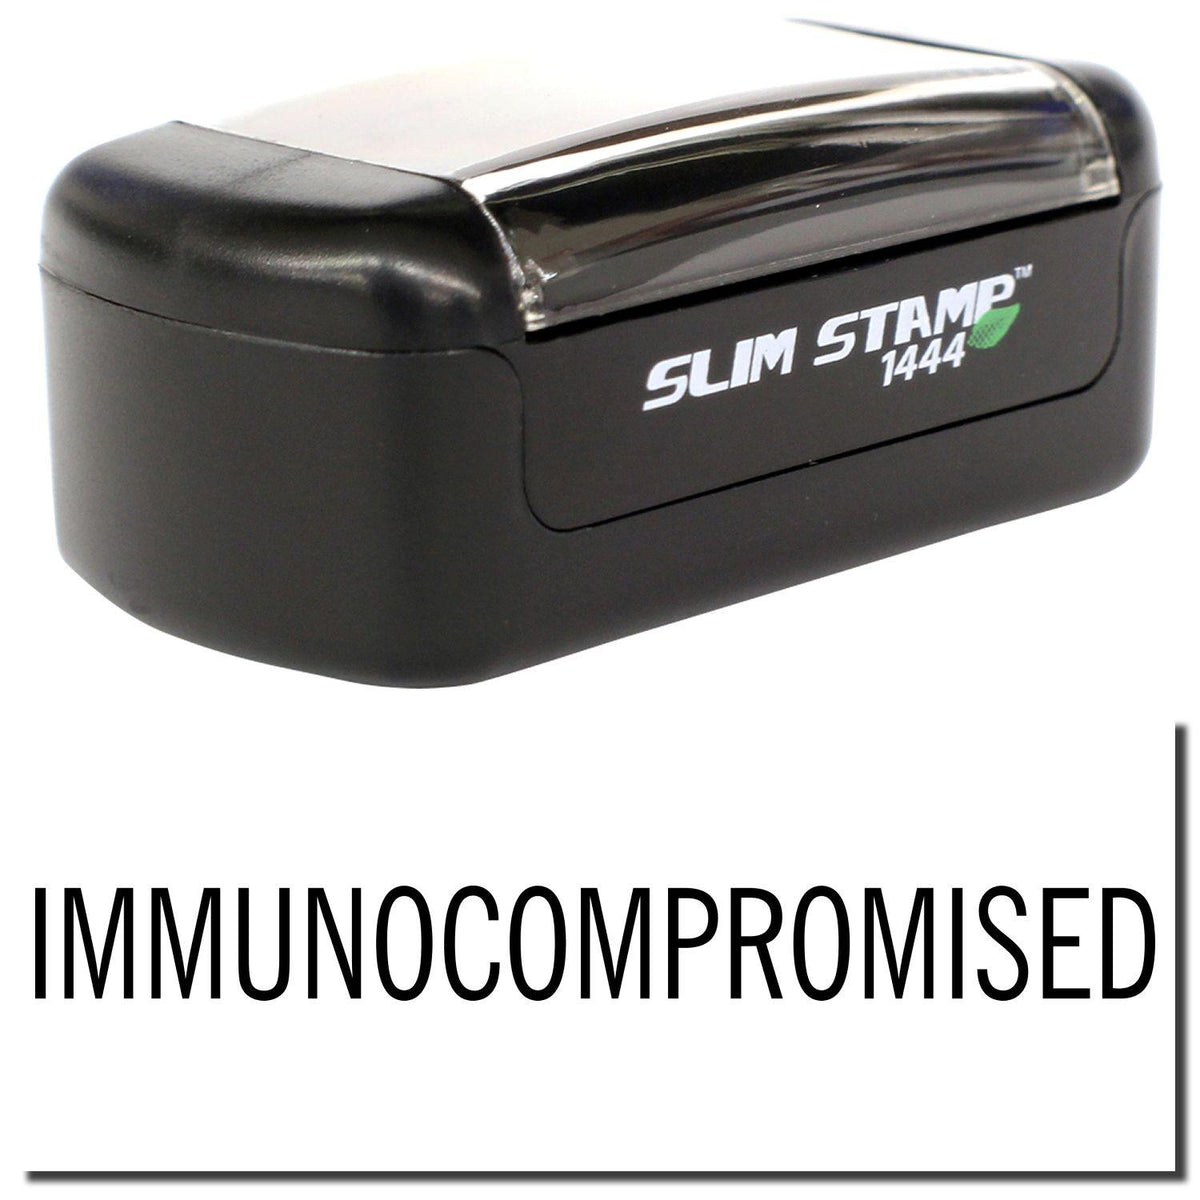 A stock office pre-inked stamp with a stamped image showing how the text &quot;IMMUNOCOMPROMISED&quot; is displayed after stamping.